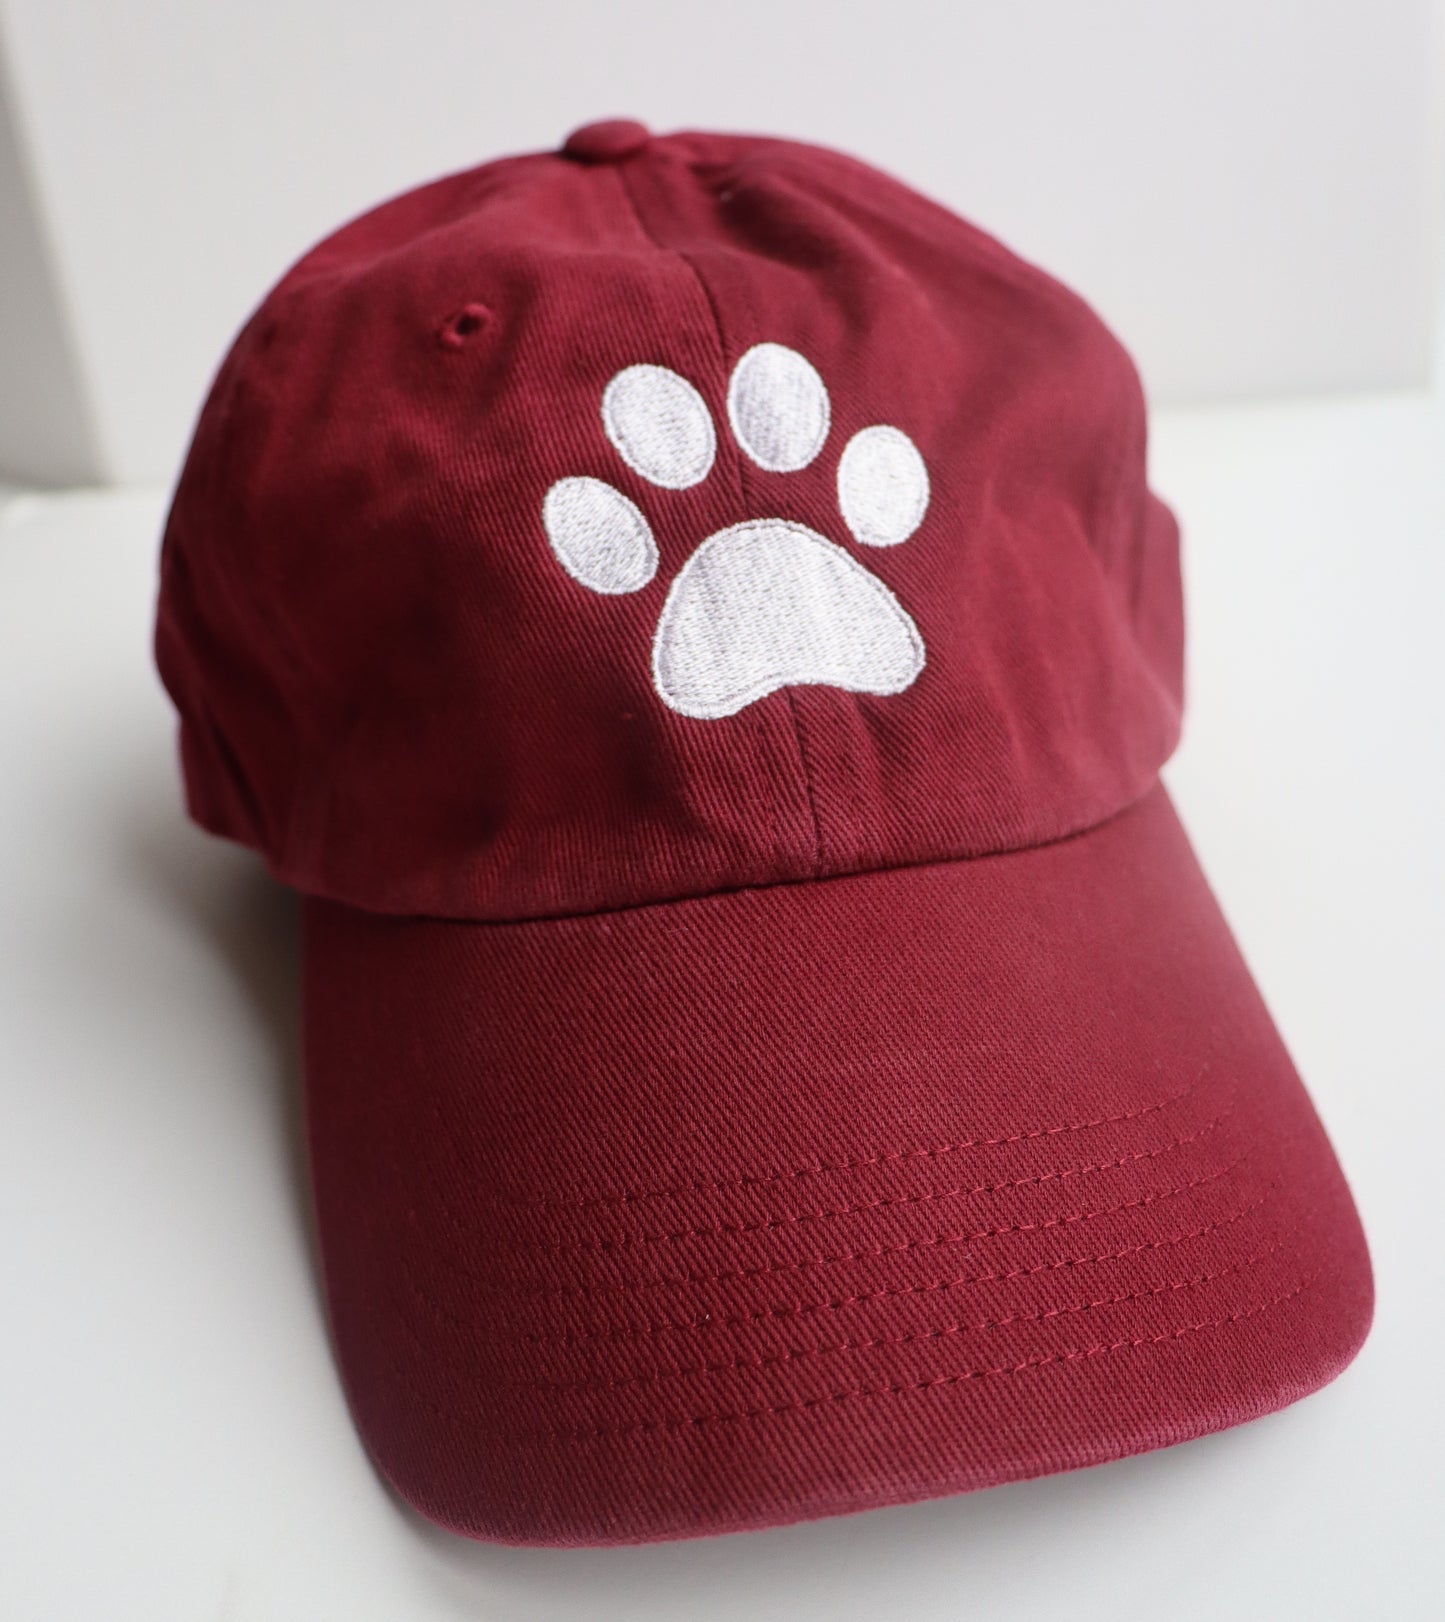 "Dog Days of Summer" Exclusive Hats (3 Styles)